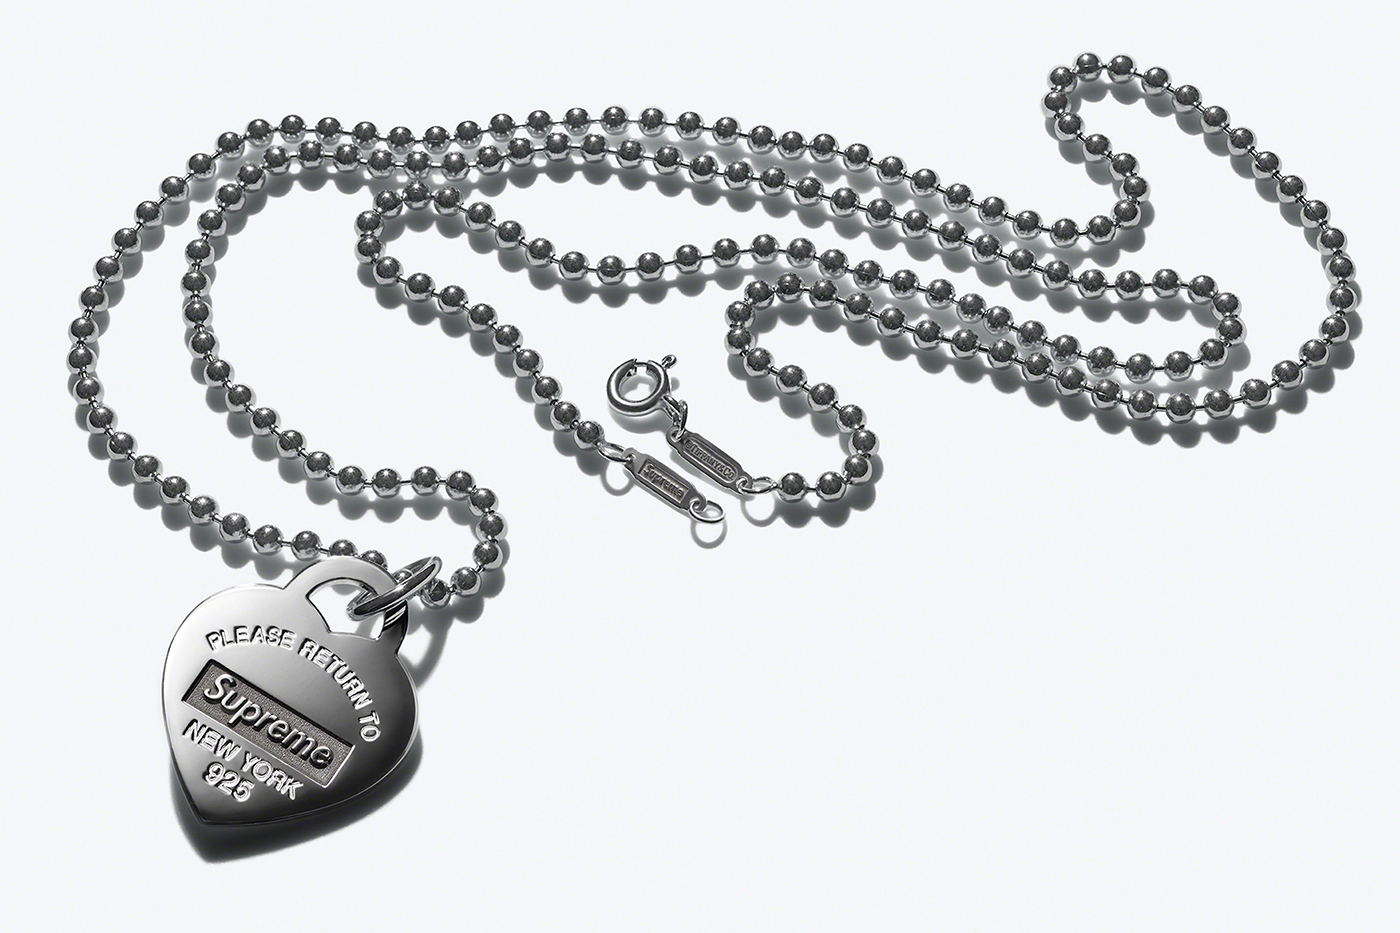 A New Era Of Tiffany & Co Is Here With A Supreme Collaboration